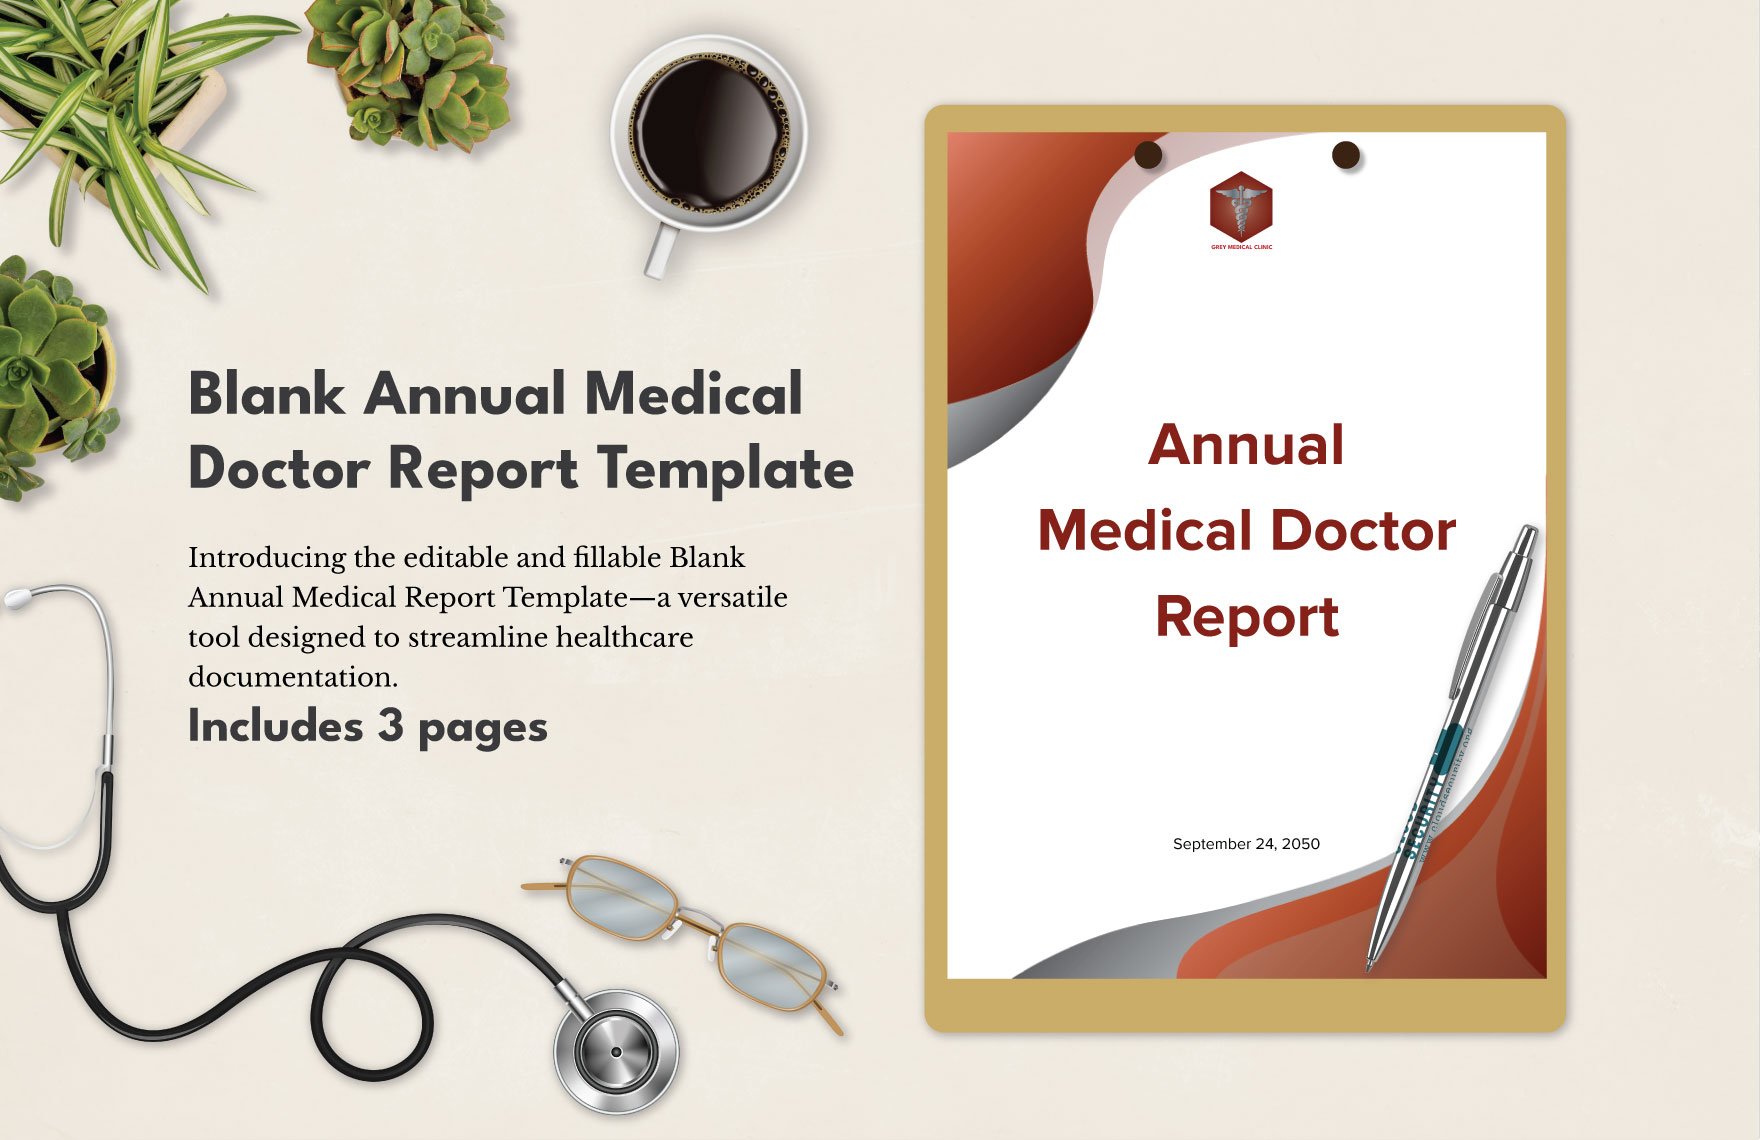 Blank Annual Medical Doctor Report Template